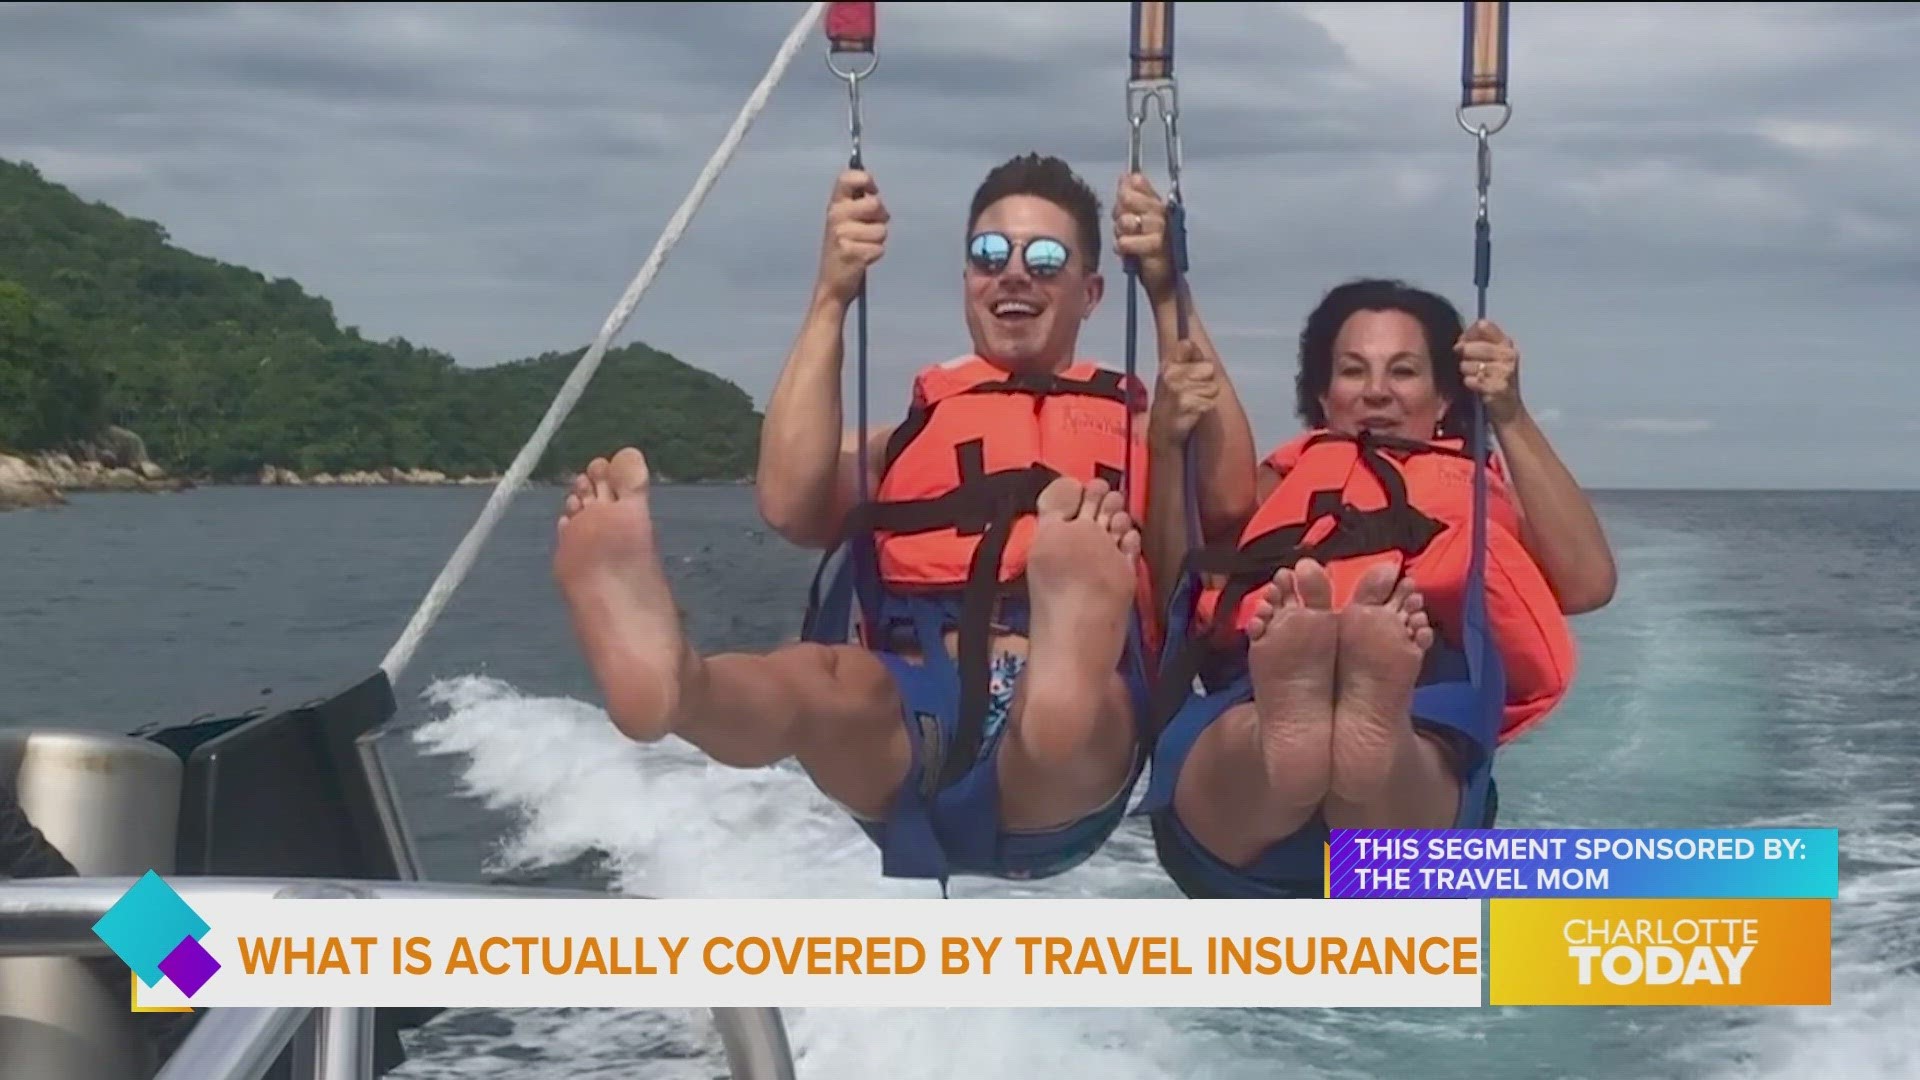 Travel Guard - Adventure Travel Insurance Plan has you covered!